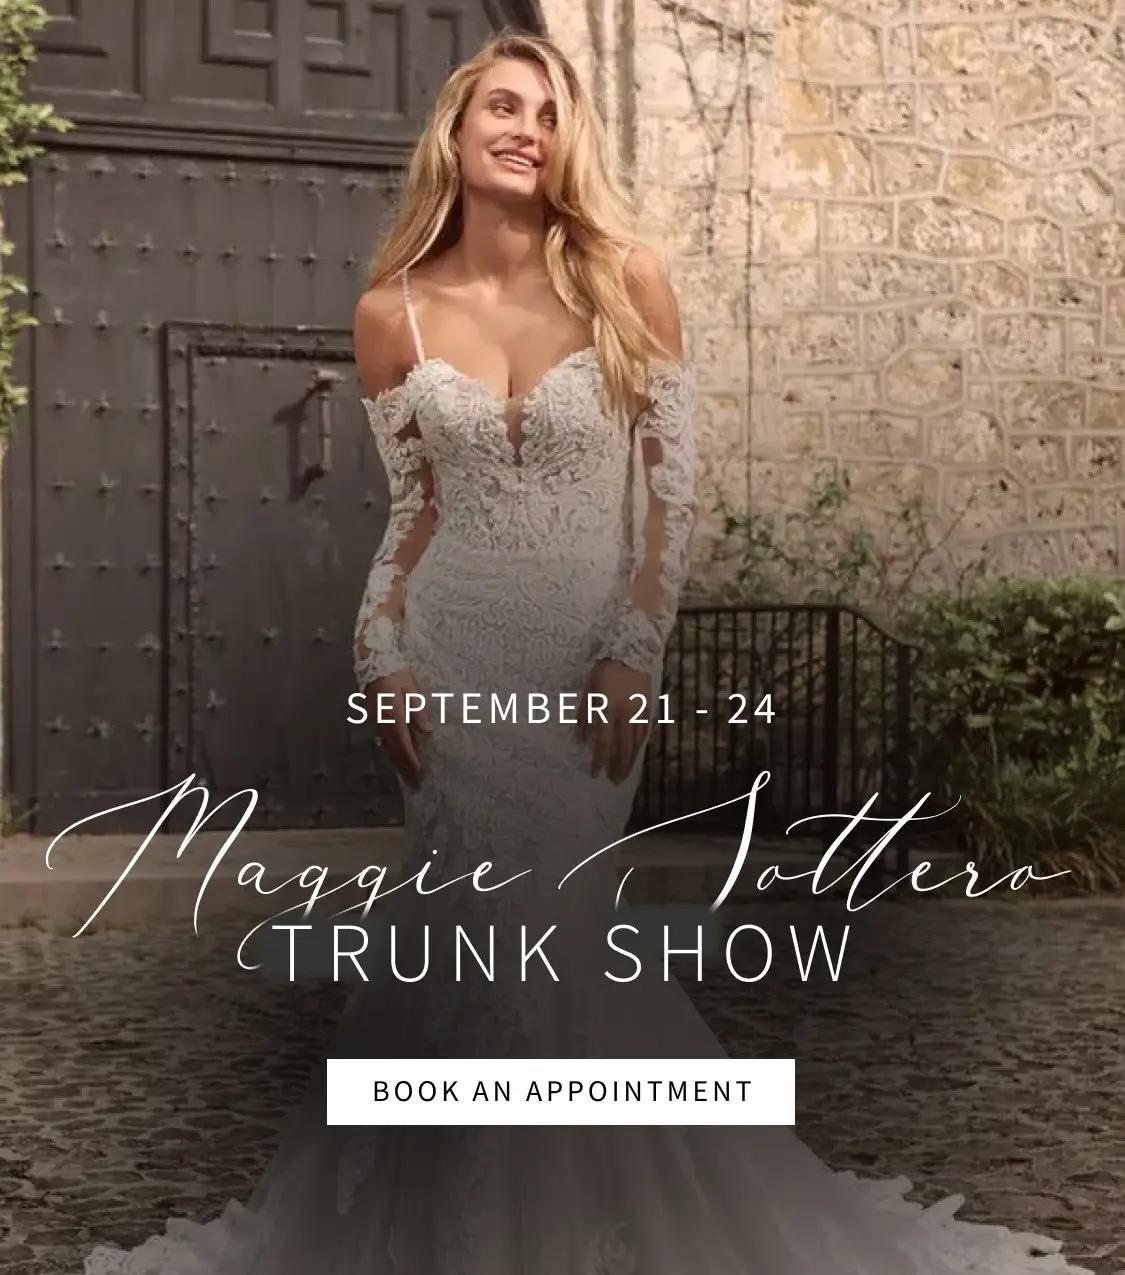 Maggie Sottero Trunk Show Sept 21-24 Banner for mobile